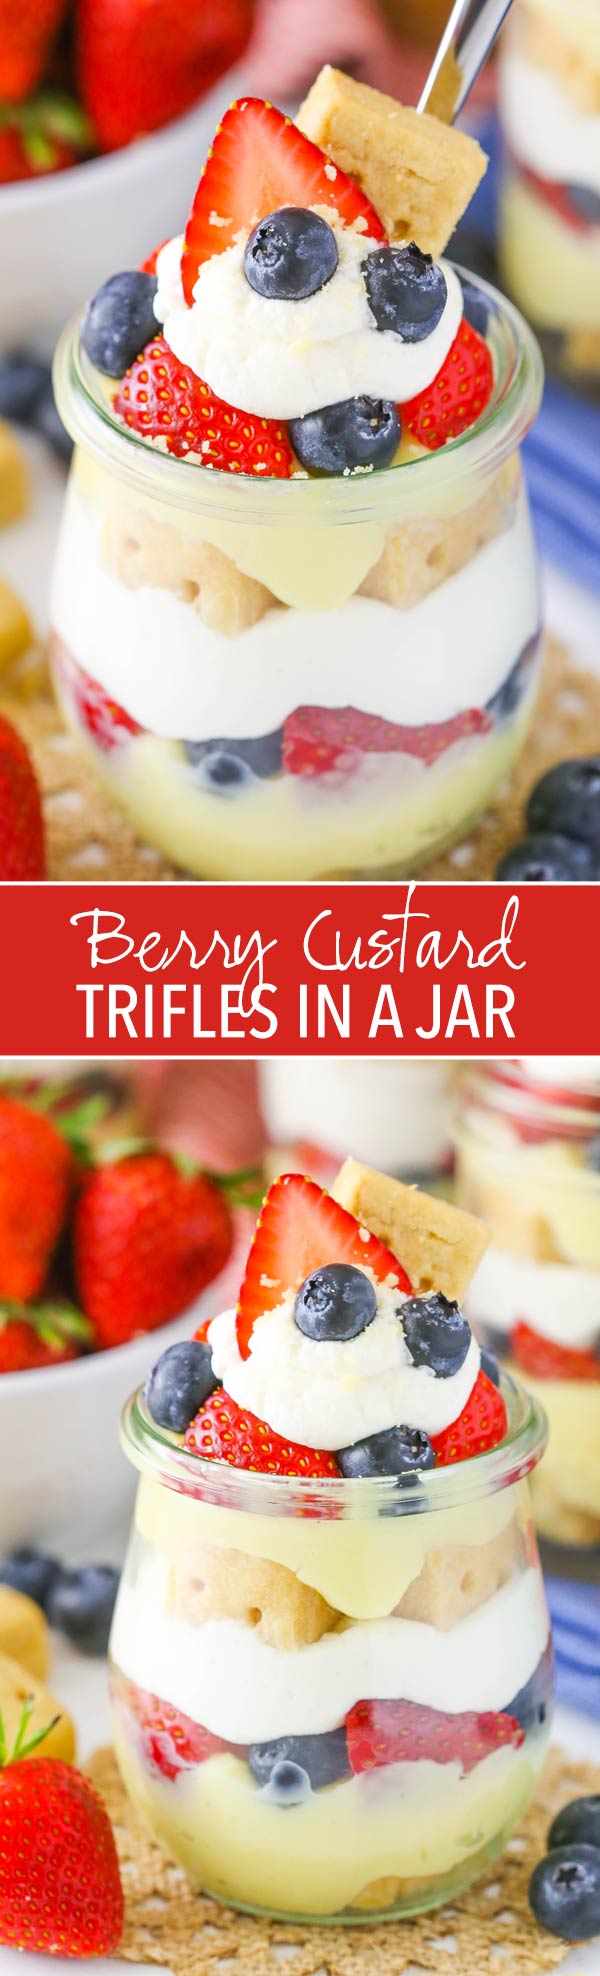 Berry Custard Trifles in a Jar - no bake with layers of Walkers shortbread, custard, whipped cream and fresh fruit!